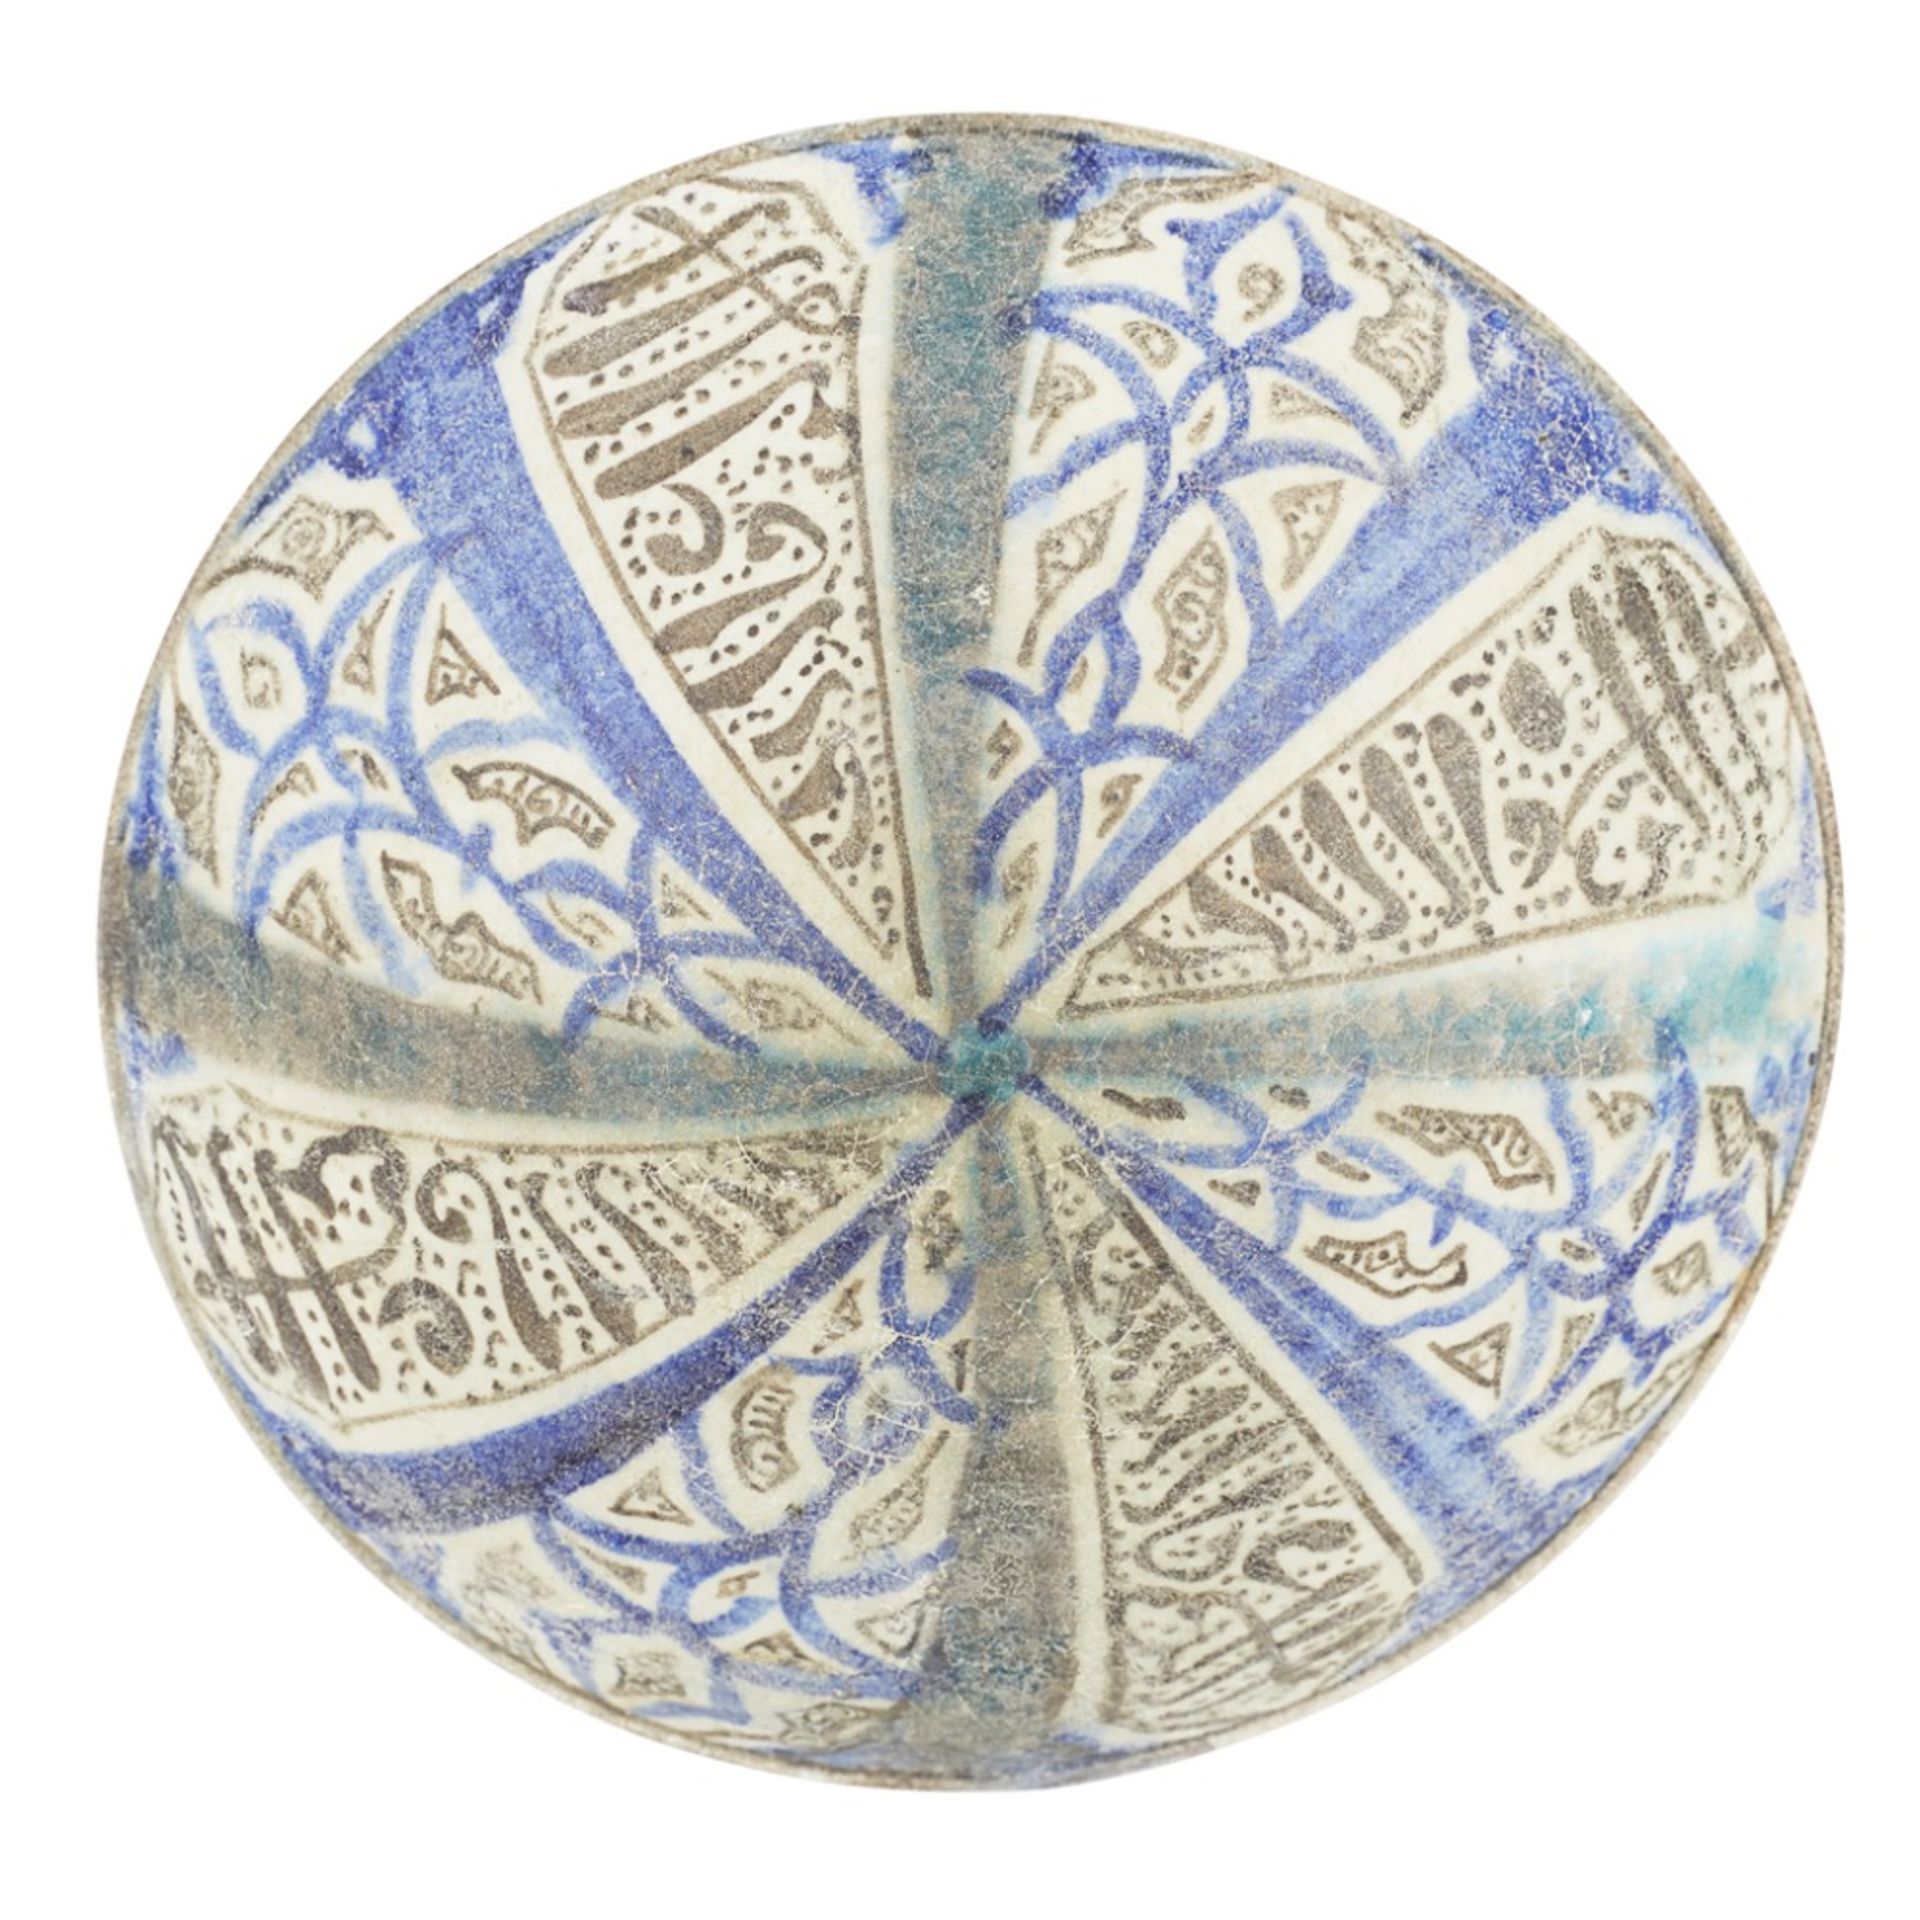 KASHAN UNDERGLAZE-PAINTED POTTERY BOWLPERSIA, 13TH CENTURY of deep rounded form on a short foot, the